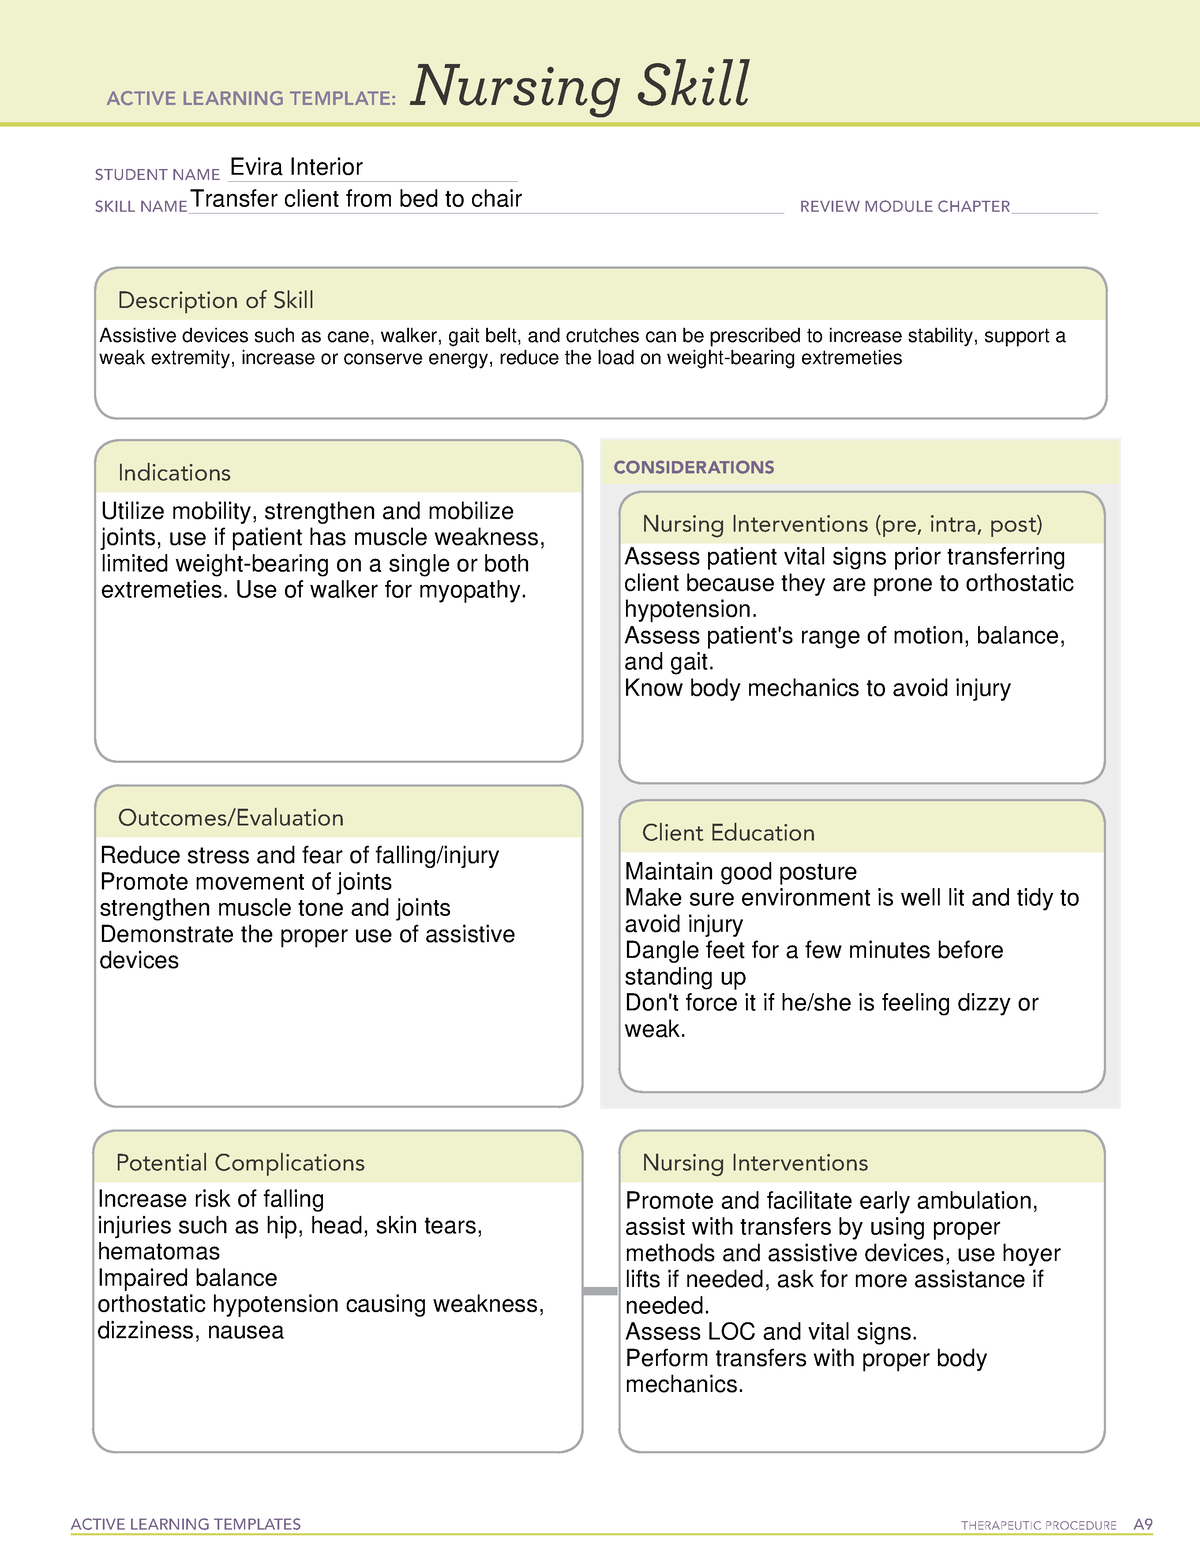 Transfer ALT Nursing Skill form ACTIVE LEARNING TEMPLATES THERAPEUTIC